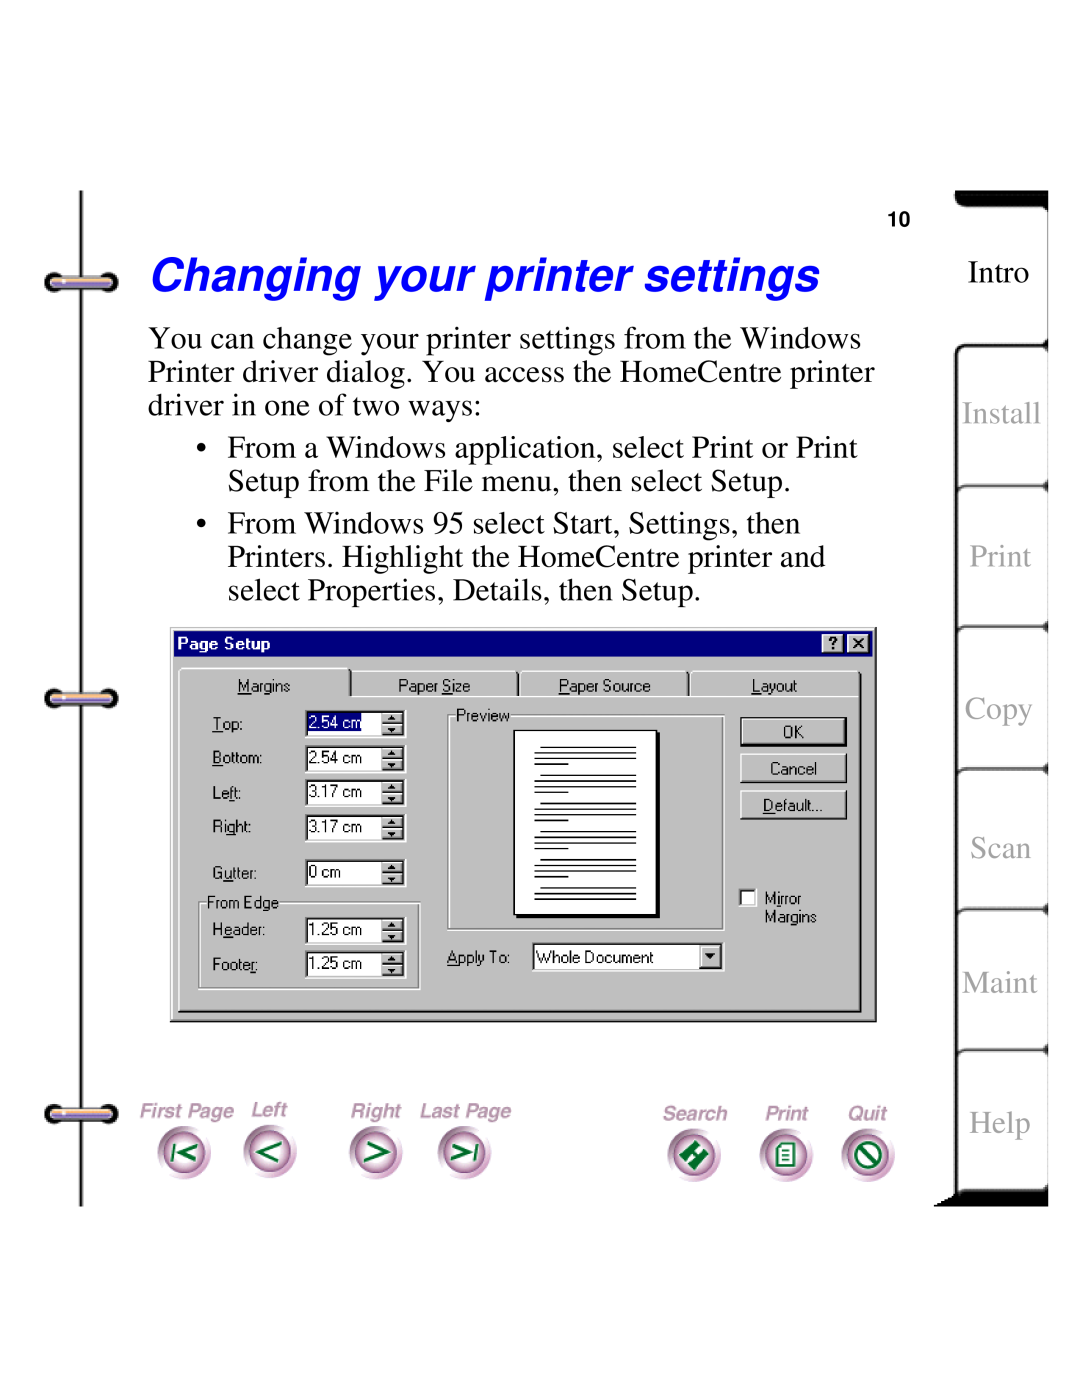 Xerox Document HomeCentre manual Changing your printer settings, Install Print Copy Scan Maint, Help 